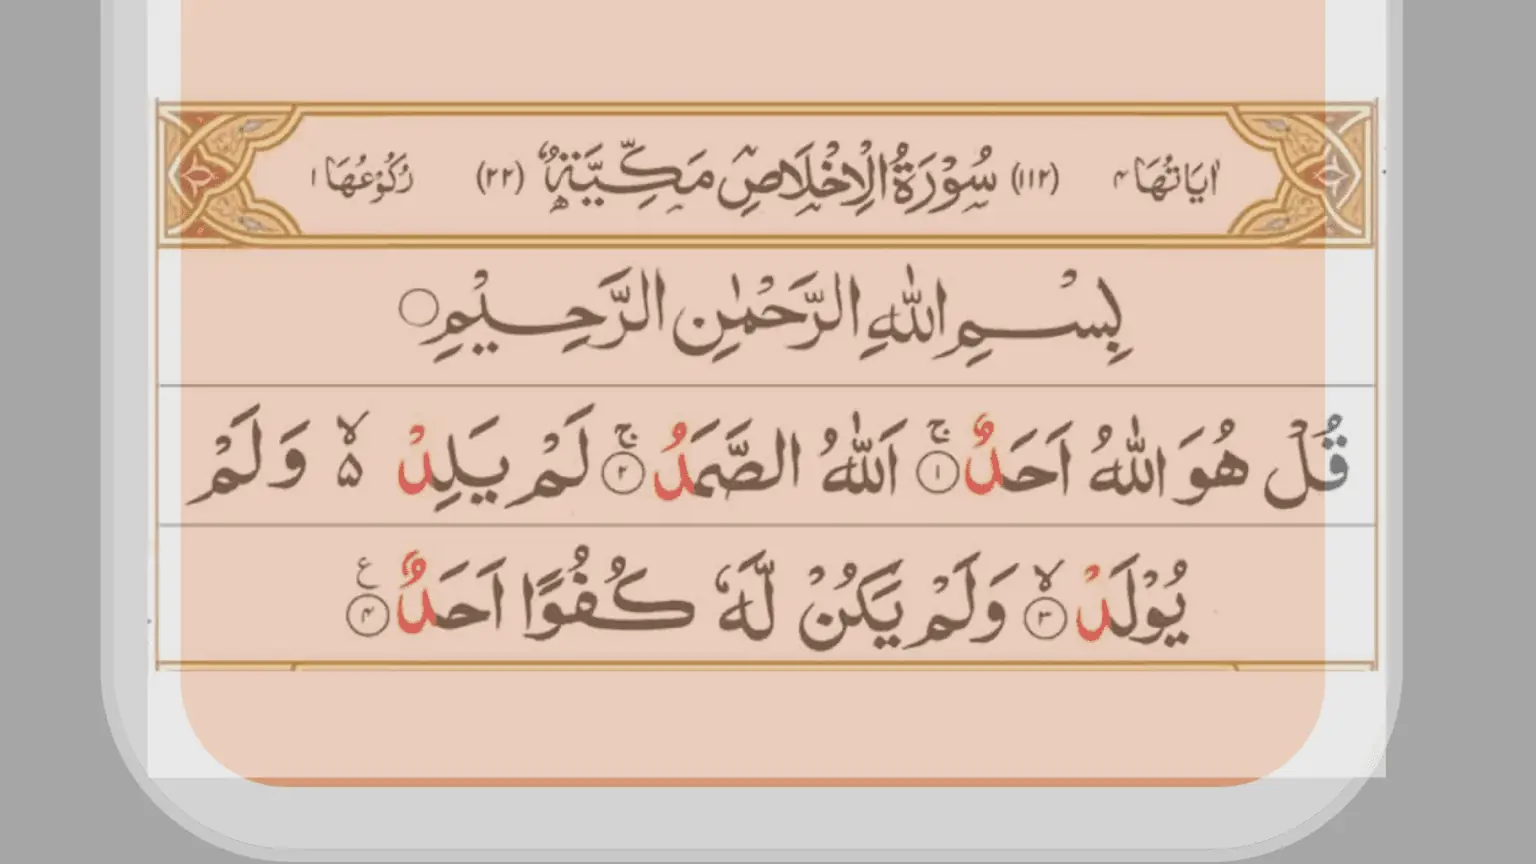 Surah Al-Ikhlas (The Purity) is one of the most important and frequently recited surahs in the Holy Quran.